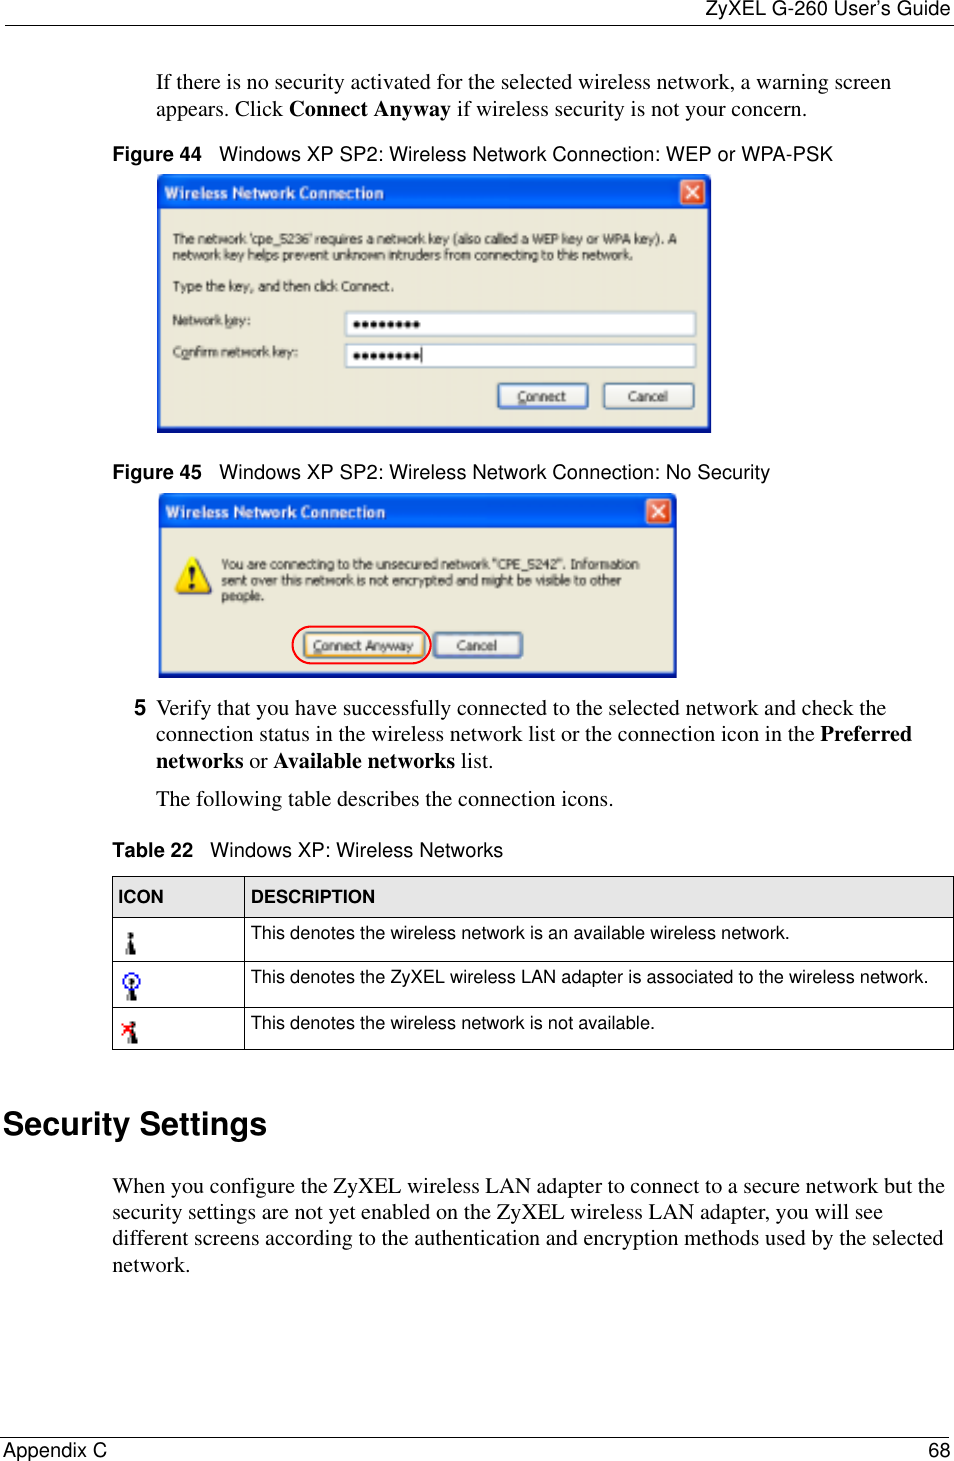 ZyXEL G-260 User’s GuideAppendix C 68If there is no security activated for the selected wireless network, a warning screen appears. Click Connect Anyway if wireless security is not your concern.Figure 44   Windows XP SP2: Wireless Network Connection: WEP or WPA-PSKFigure 45   Windows XP SP2: Wireless Network Connection: No Security5Verify that you have successfully connected to the selected network and check the connection status in the wireless network list or the connection icon in the Preferred networks or Available networks list.The following table describes the connection icons.Security SettingsWhen you configure the ZyXEL wireless LAN adapter to connect to a secure network but the security settings are not yet enabled on the ZyXEL wireless LAN adapter, you will see different screens according to the authentication and encryption methods used by the selected network.Table 22   Windows XP: Wireless NetworksICON DESCRIPTIONThis denotes the wireless network is an available wireless network.This denotes the ZyXEL wireless LAN adapter is associated to the wireless network.This denotes the wireless network is not available.